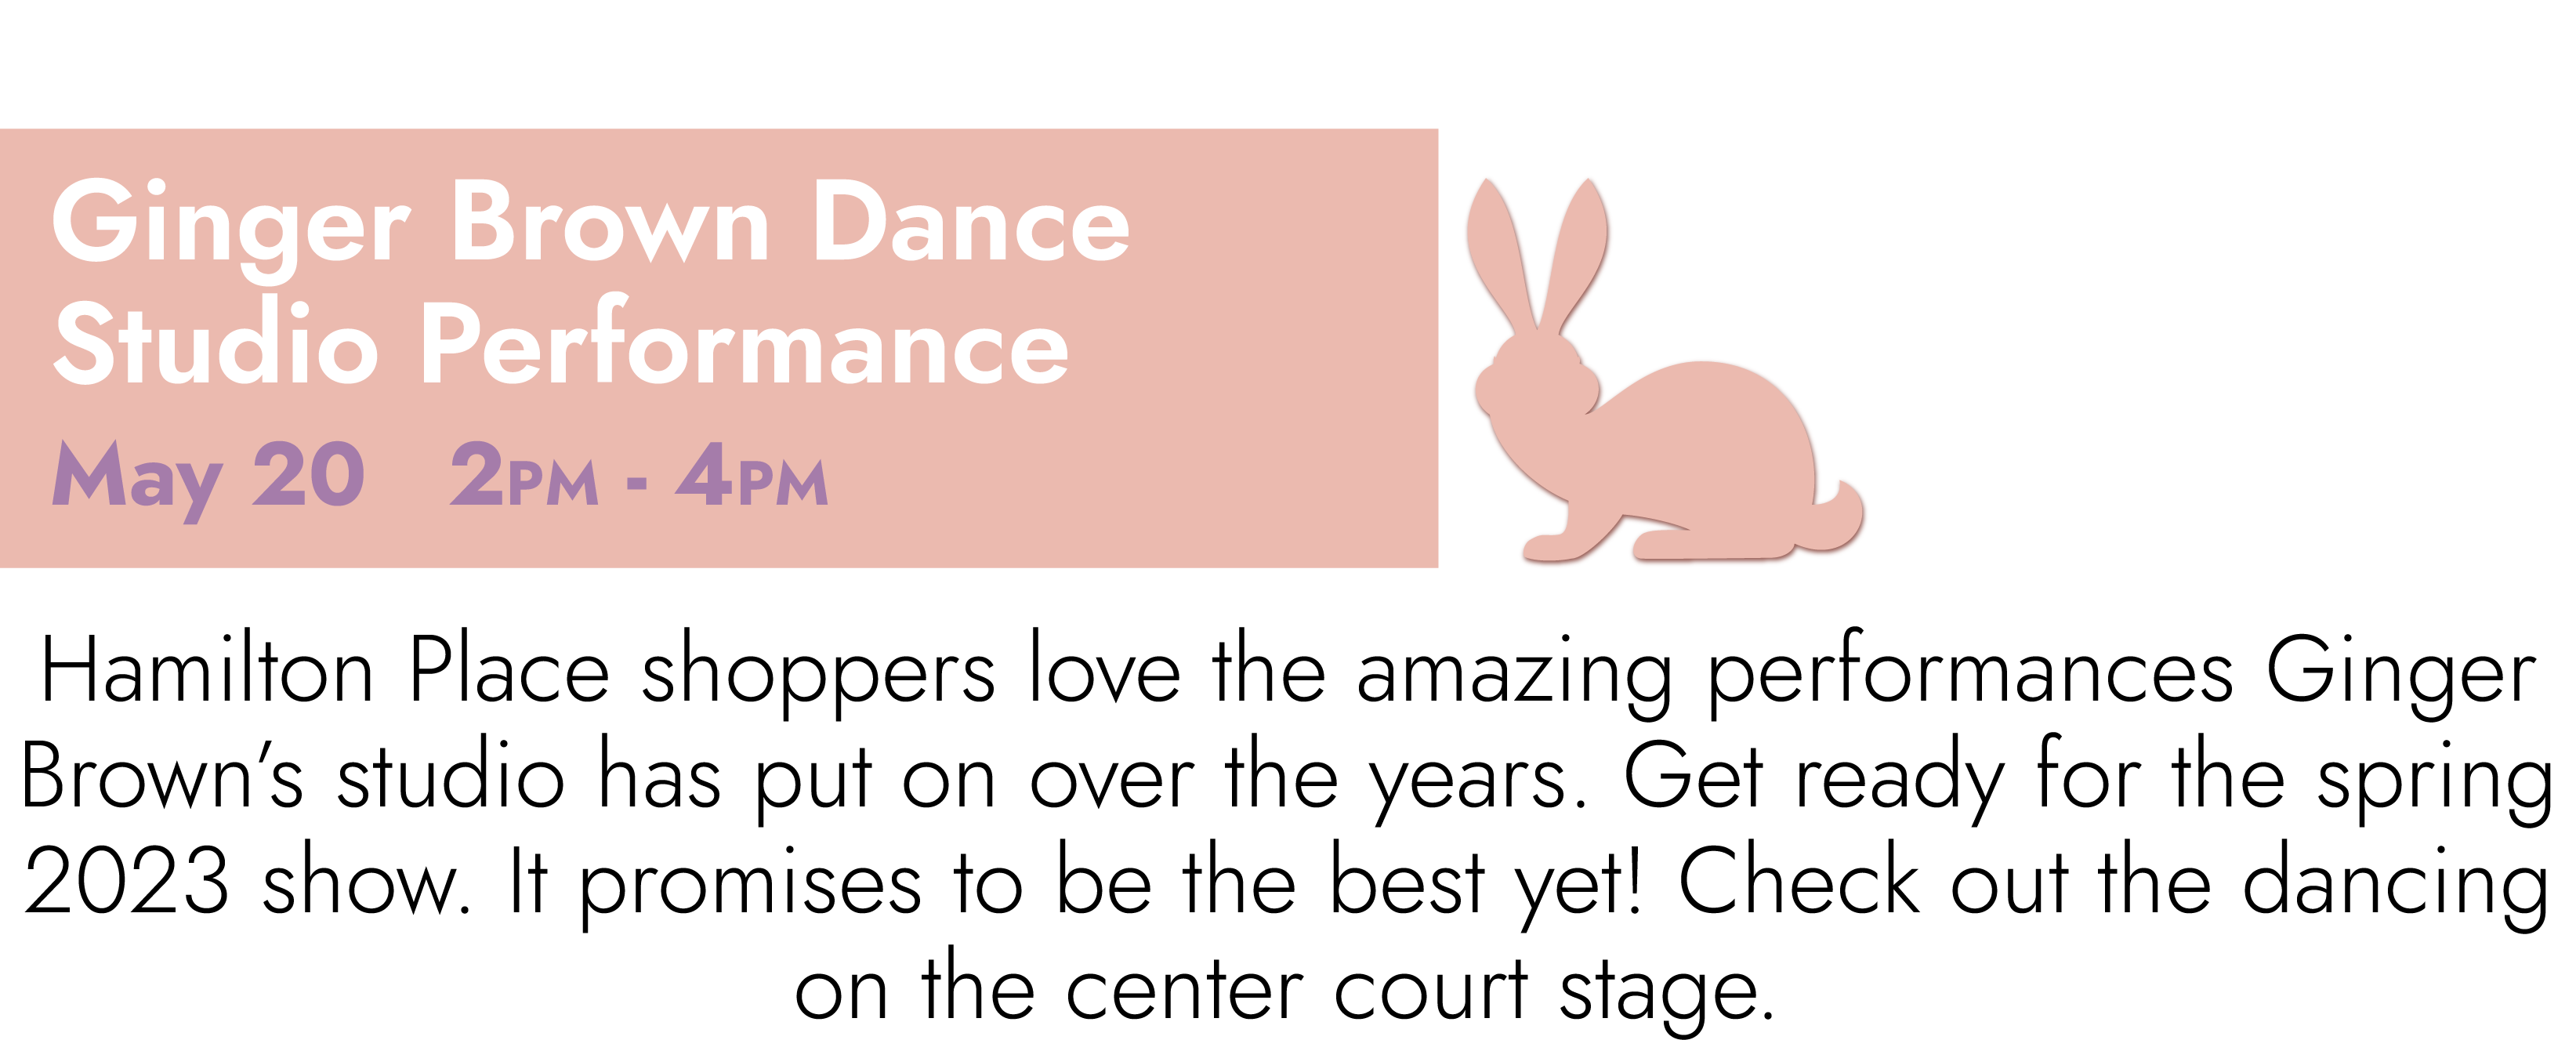 Ginger Brown Dance Studio May 20 2PM – 4PM Hamilton Place shoppers love the amazing performances Ginger Brown’s studio has put on over the years. Get ready for the spring 2023 show. It promises to be the best yet! Check out the dancing on the center court stage.